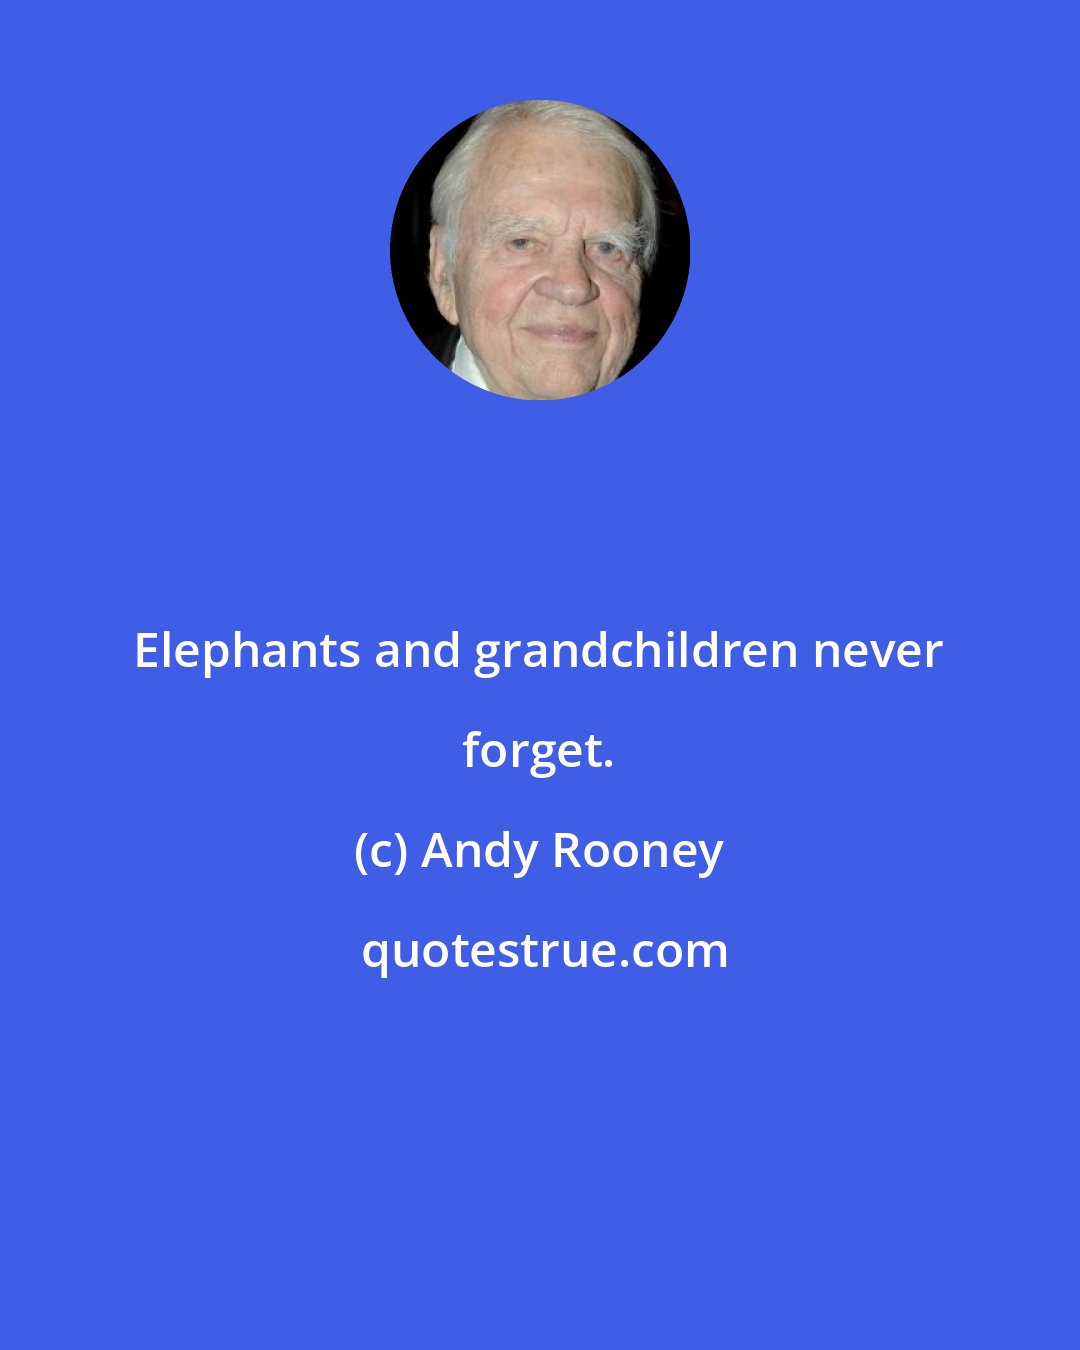 Andy Rooney: Elephants and grandchildren never forget.